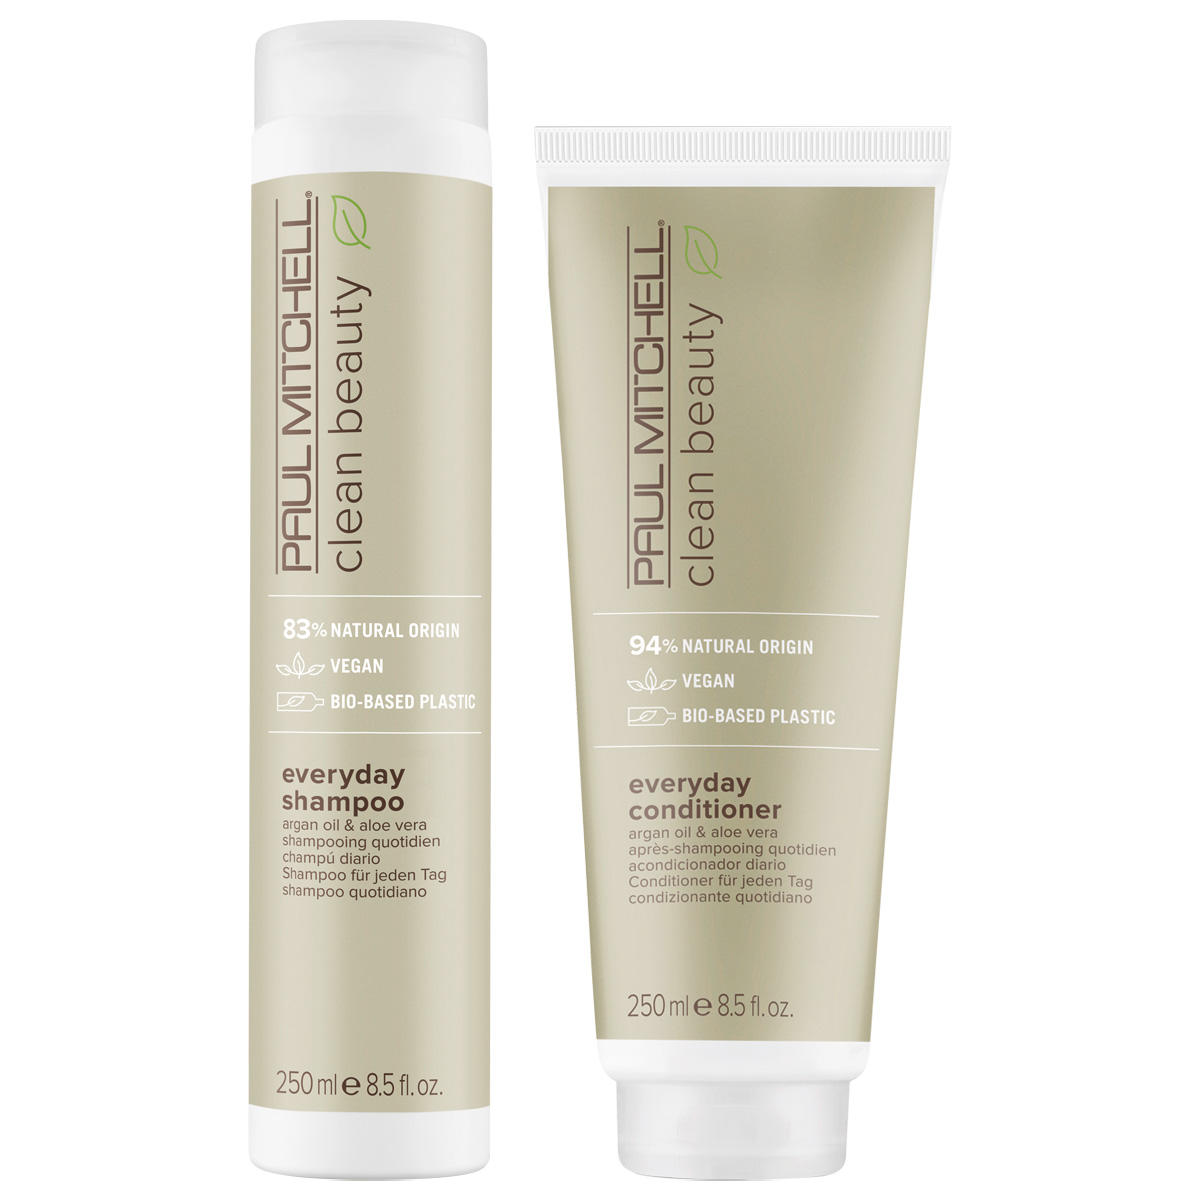 Paul Mitchell Clean Beauty Everyday Set